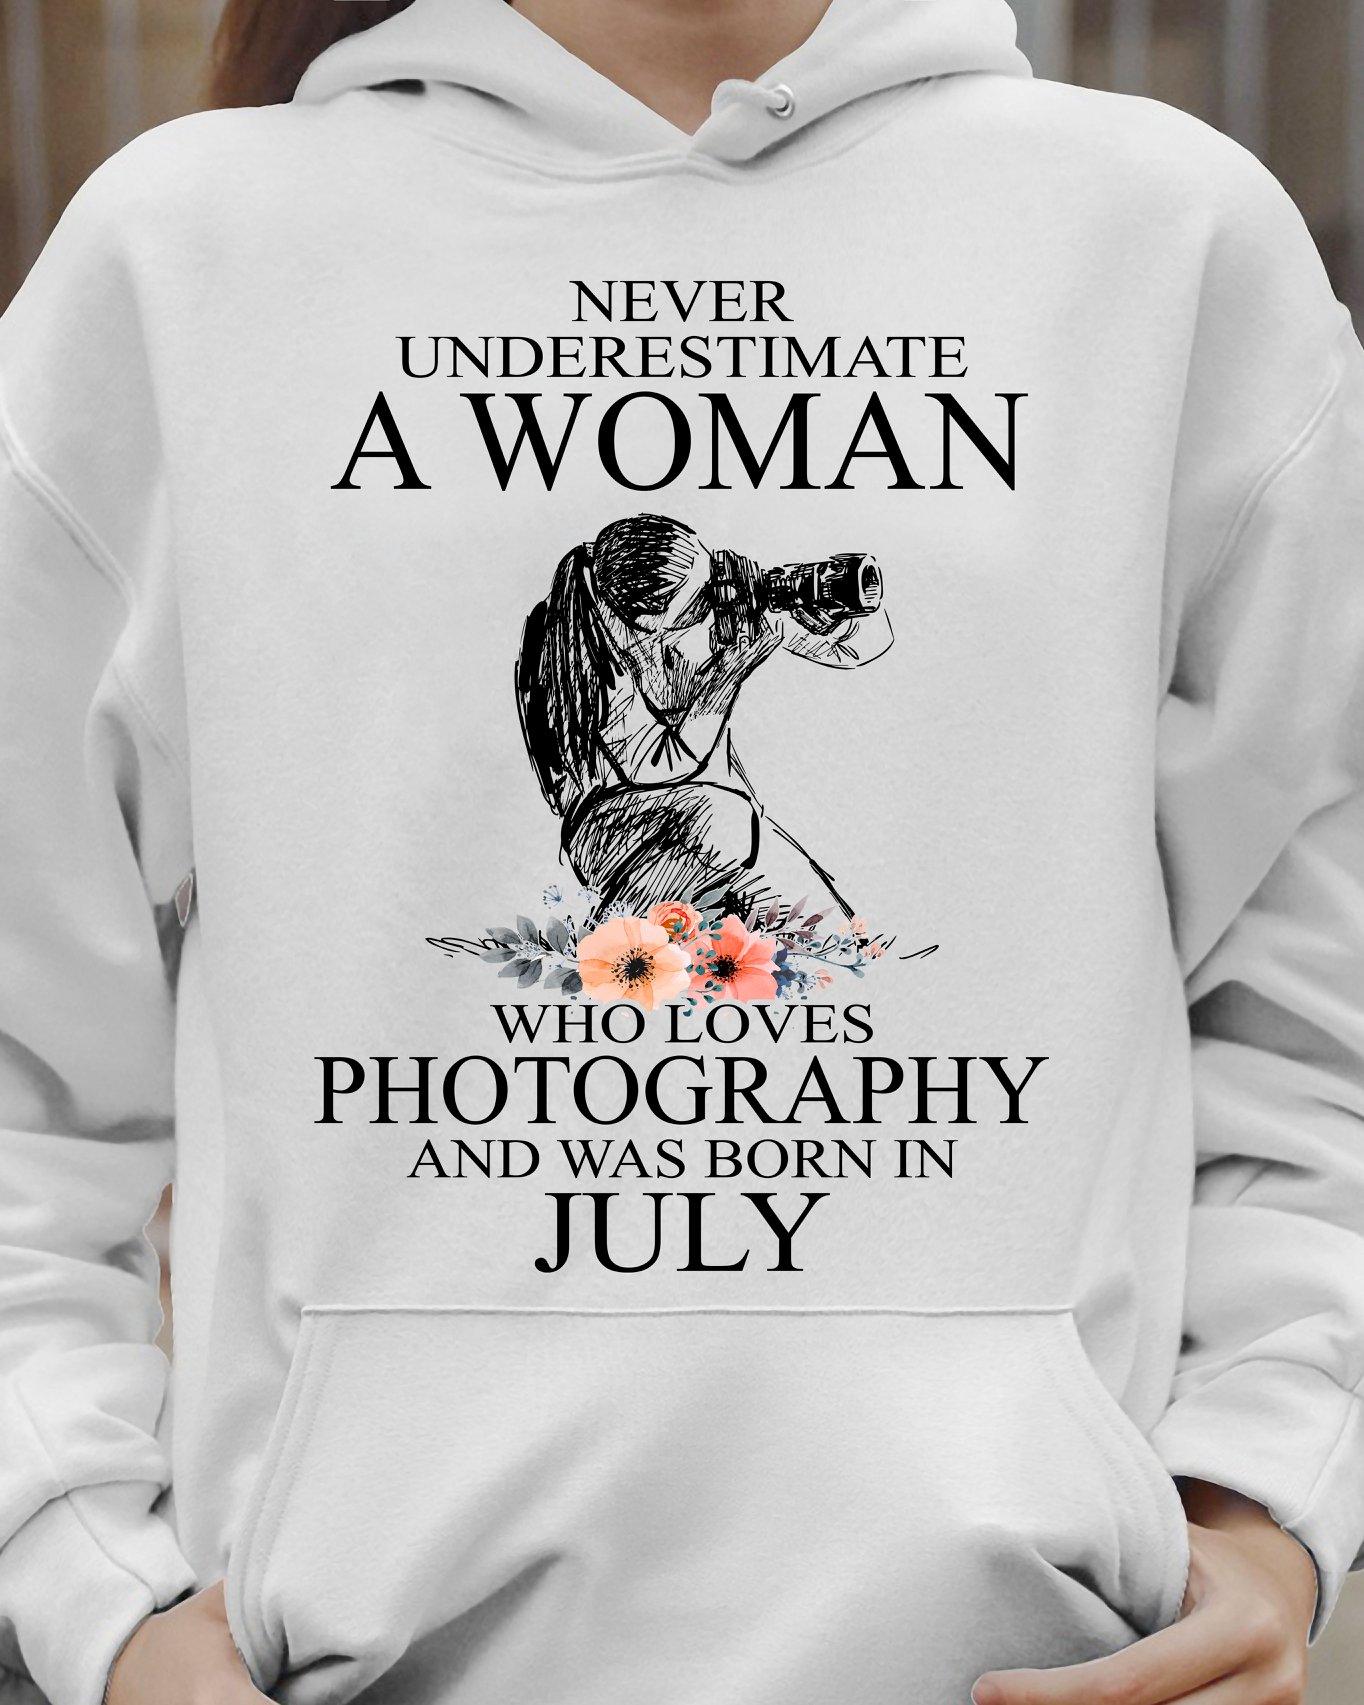 Never underestimate a woman who loves photography and was born in July